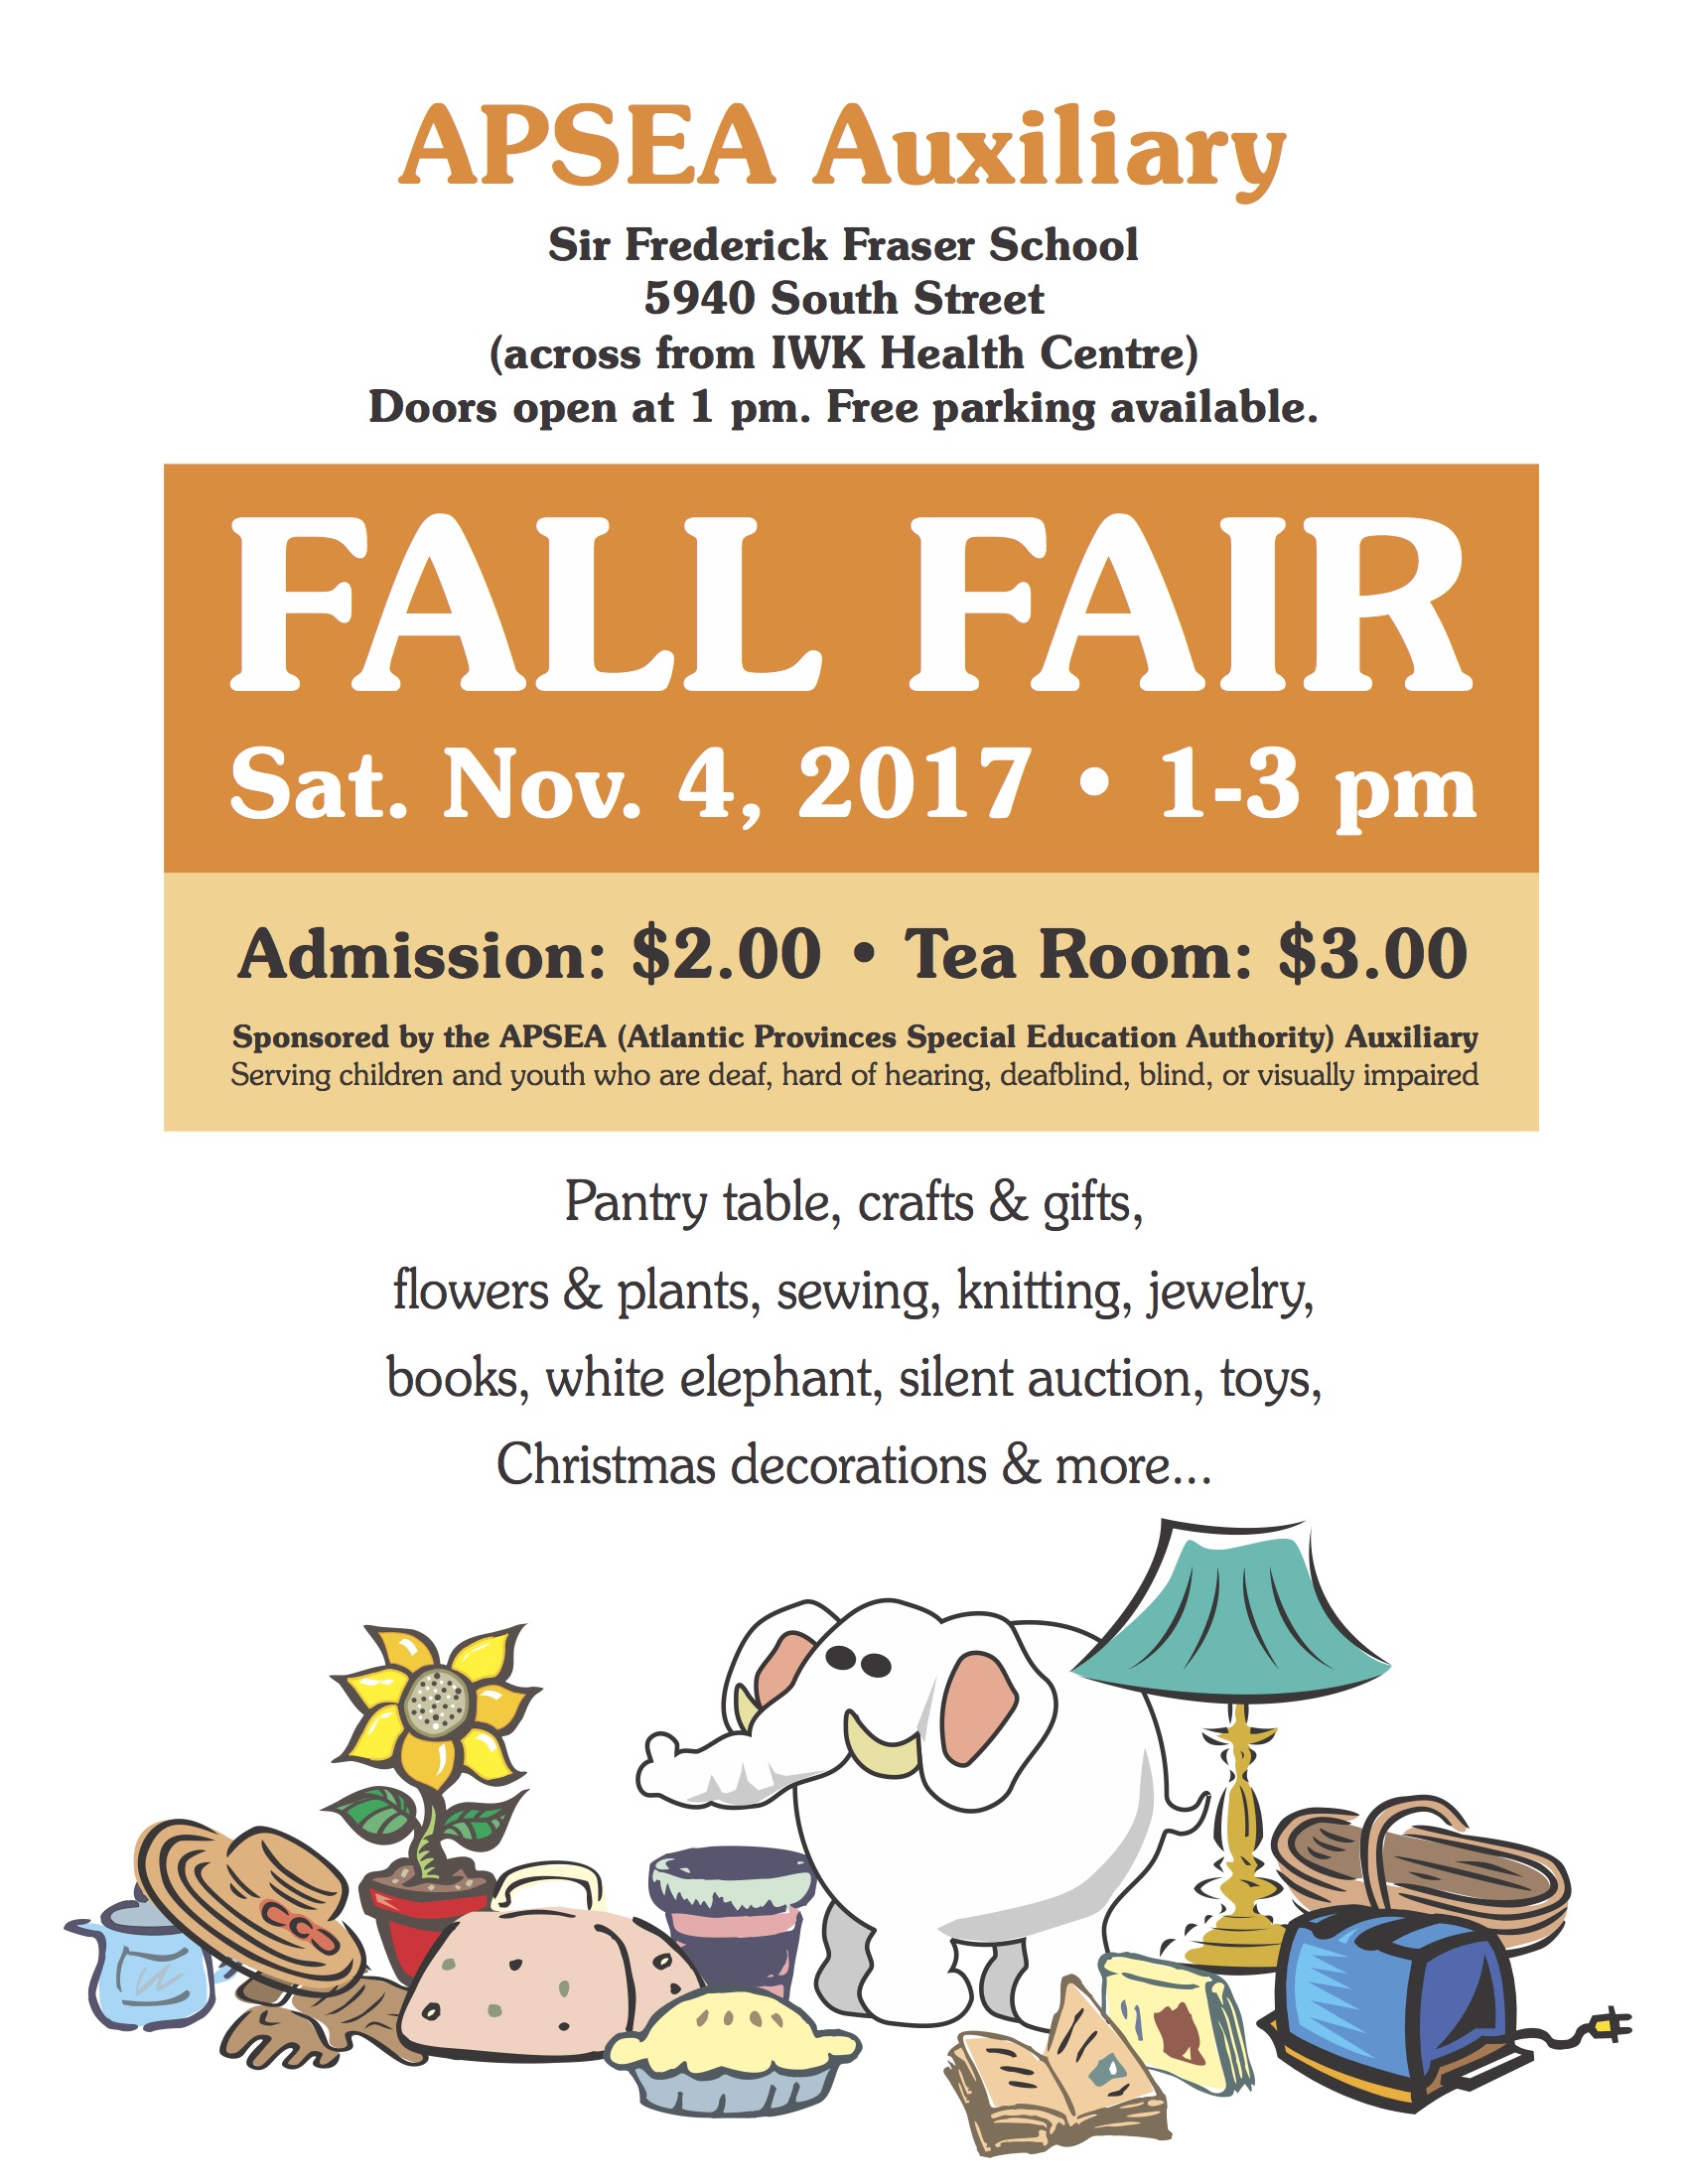 APSEA Auxiliary Sir Frederick Fraser School 5940 South Street (across from IWK Health Centre) Doors open at 1 pm. Free parking available. FALL FAIR Sat. Nov. 4, 2017 • 1-3 pm Admission: $2.00 • Tea Room: $3.00 Sponsored by the APSEA (Atlantic Provinces Special Education Authority) Auxiliary Serving children and youth who are deaf, hard of hearing, deafblind, blind, or visually impaired Pantry table, crafts & gifts, flowers & plants, sewing, knitting, jewelry, books, white elephant, silent auction, toys, Christmas decorations & more...